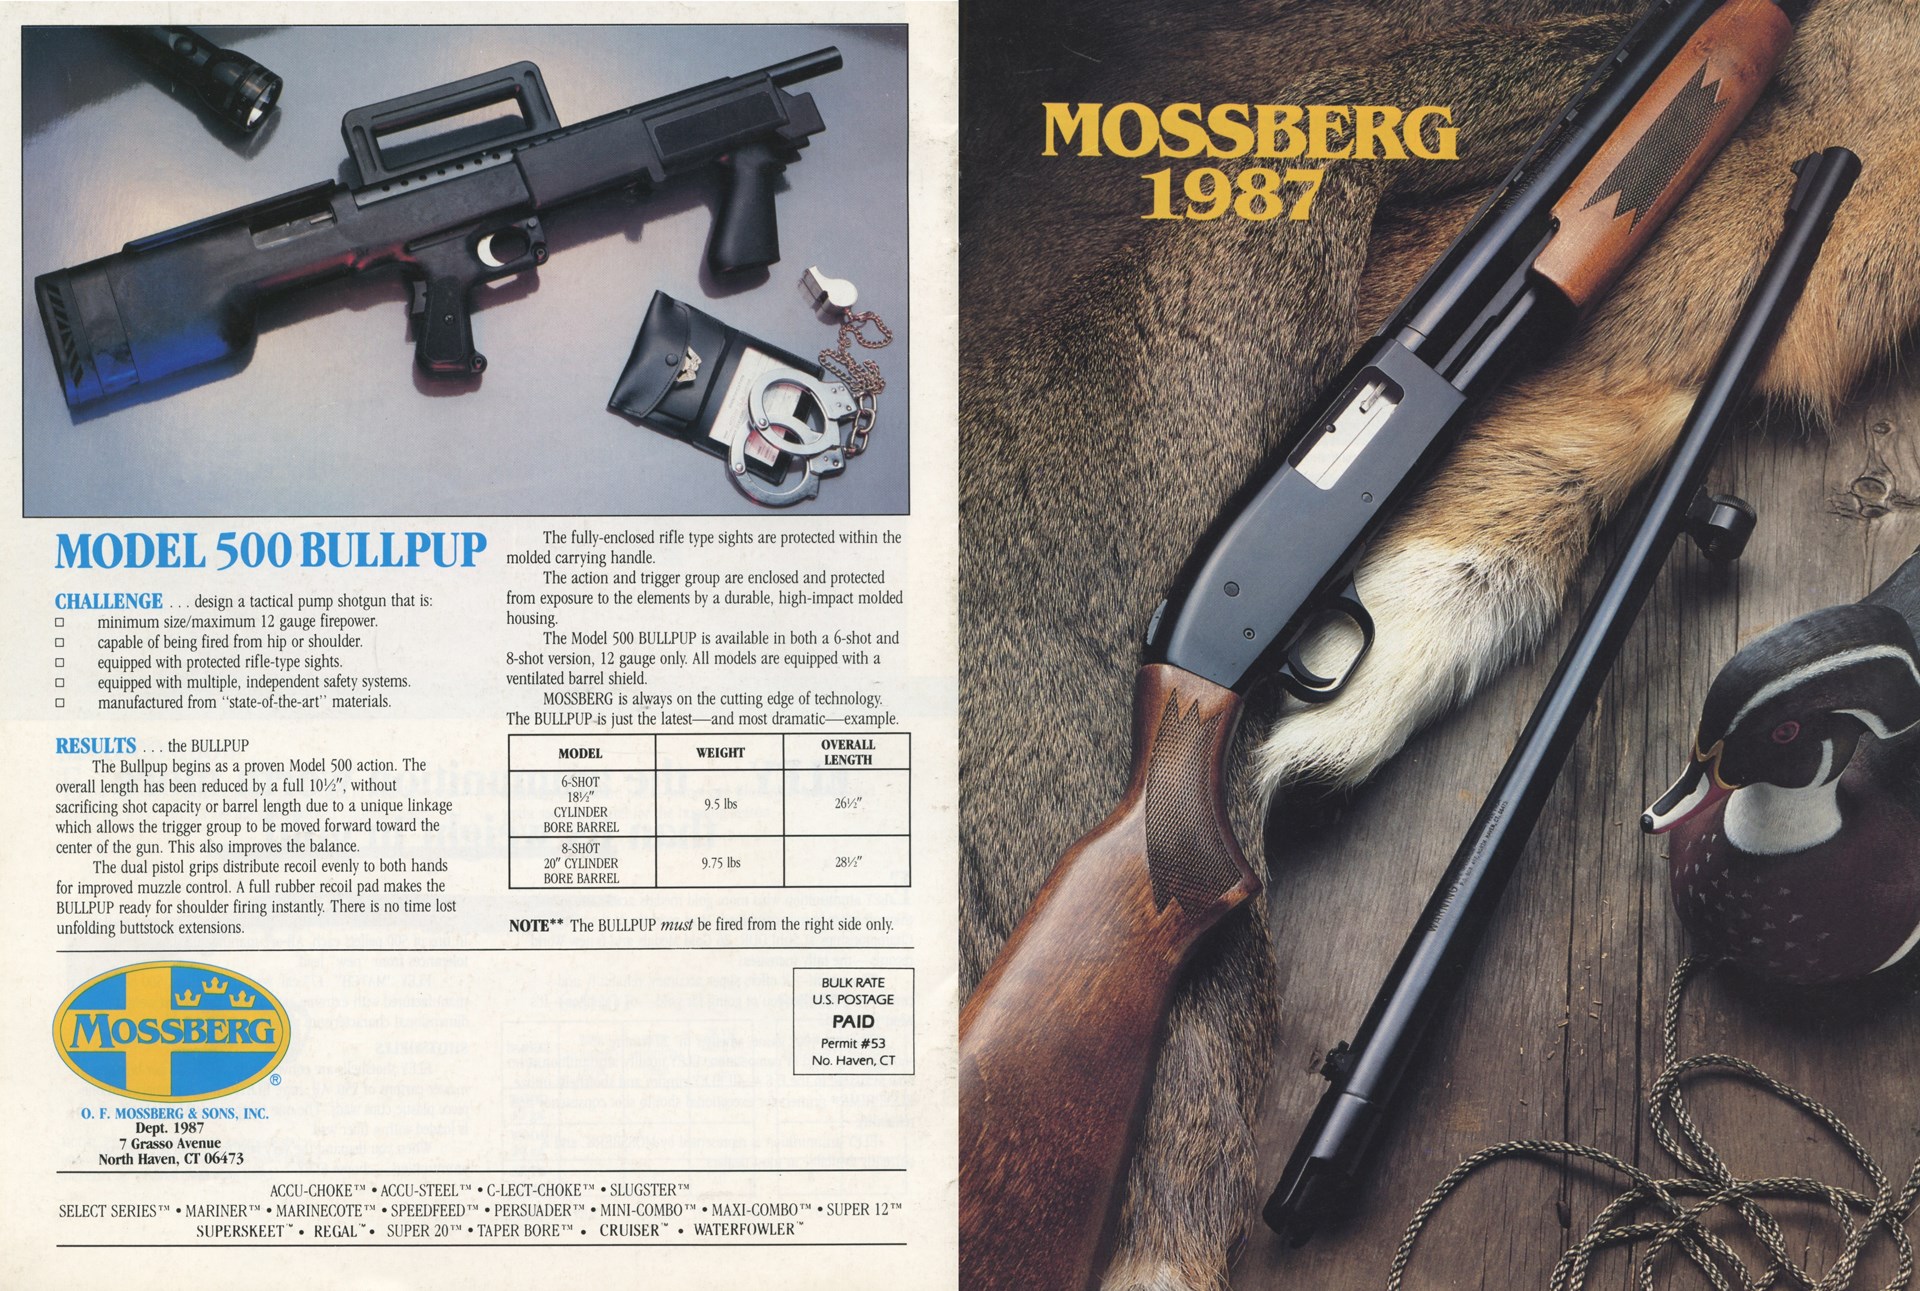 Mossberg 1987 catalog front and back cover guns hunting